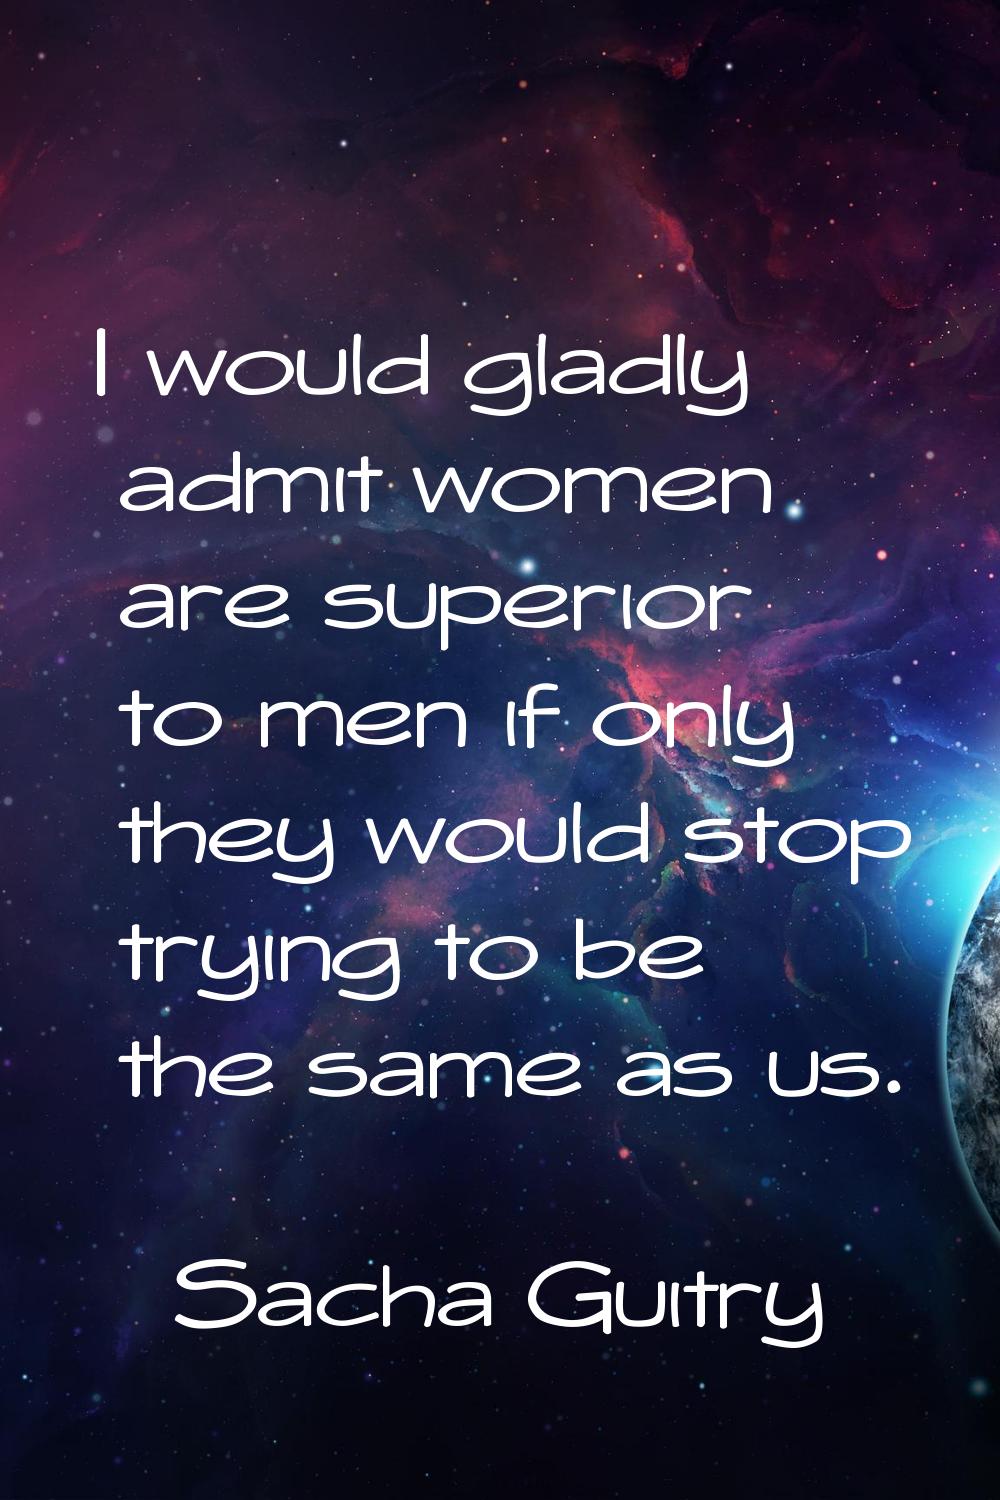 I would gladly admit women are superior to men if only they would stop trying to be the same as us.